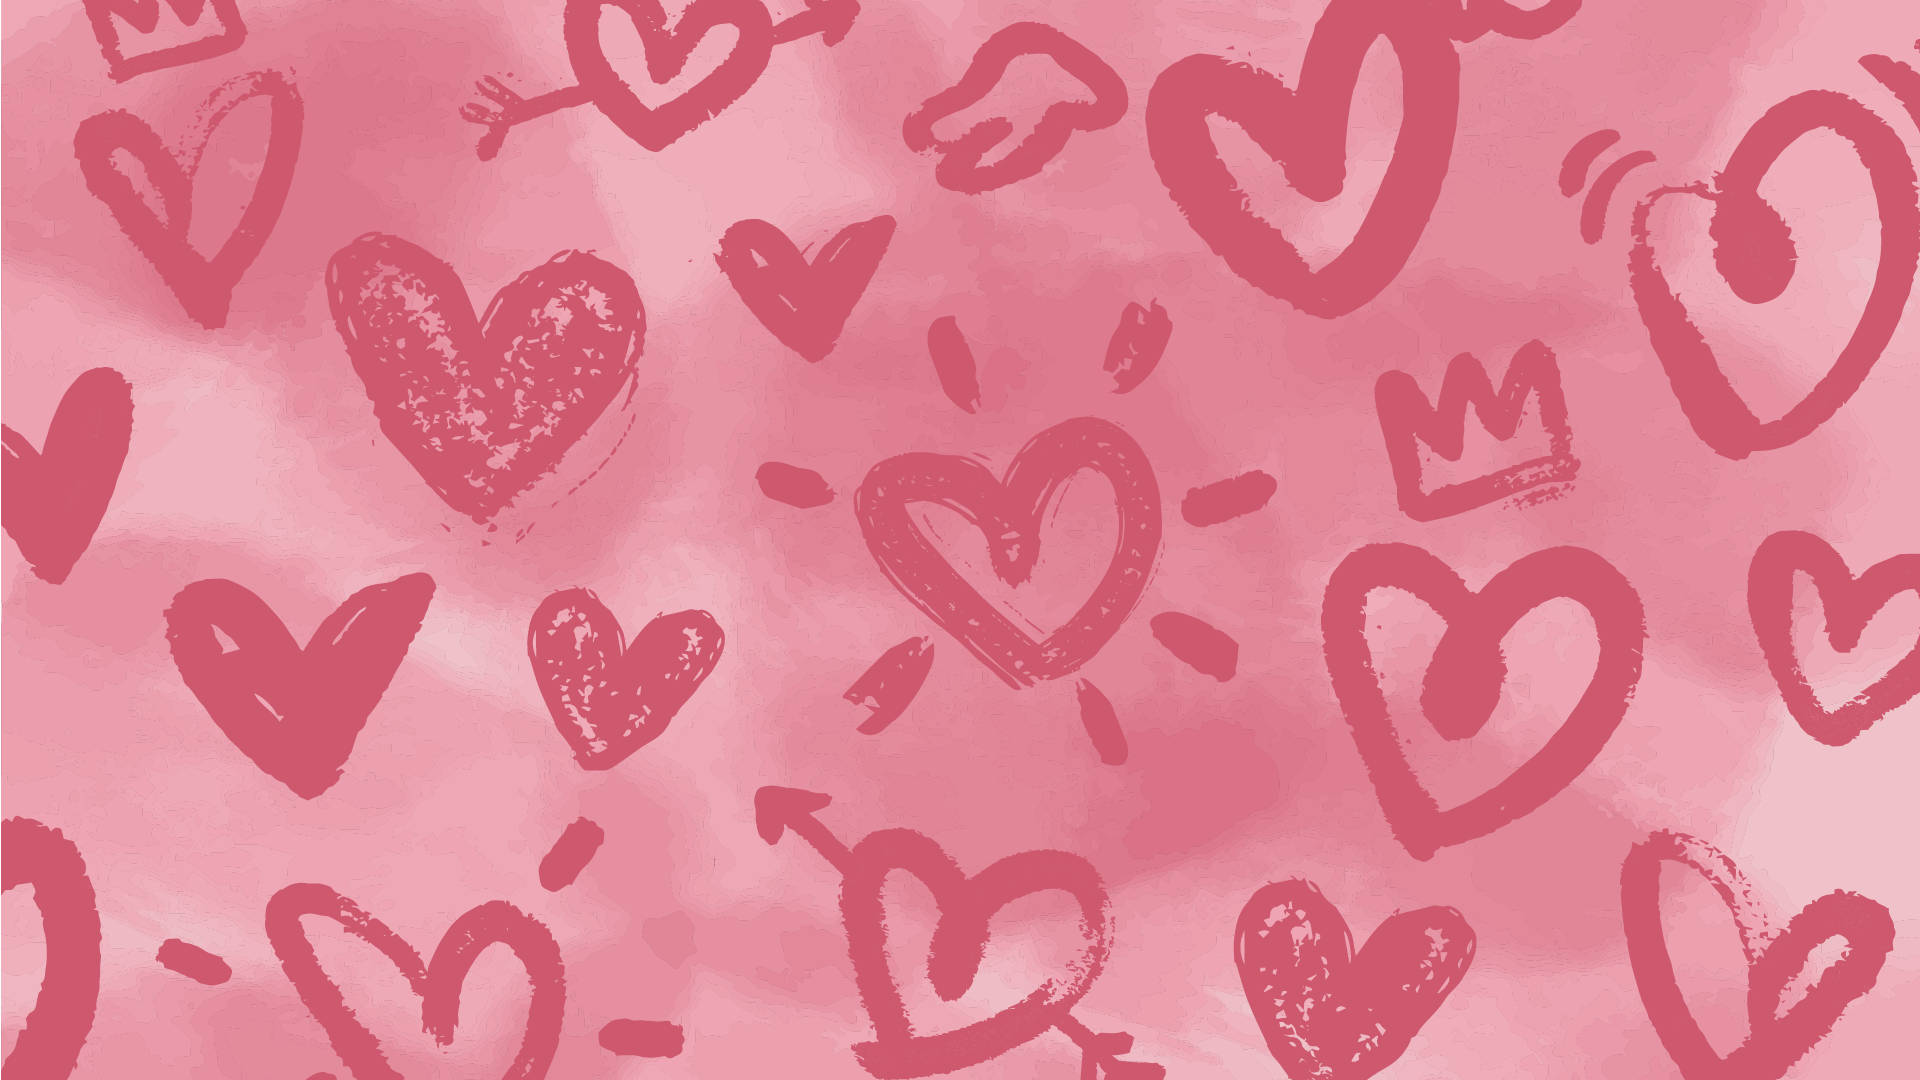 Free Pink Heart Wallpaper Downloads, [200+] Pink Heart Wallpapers for FREE  